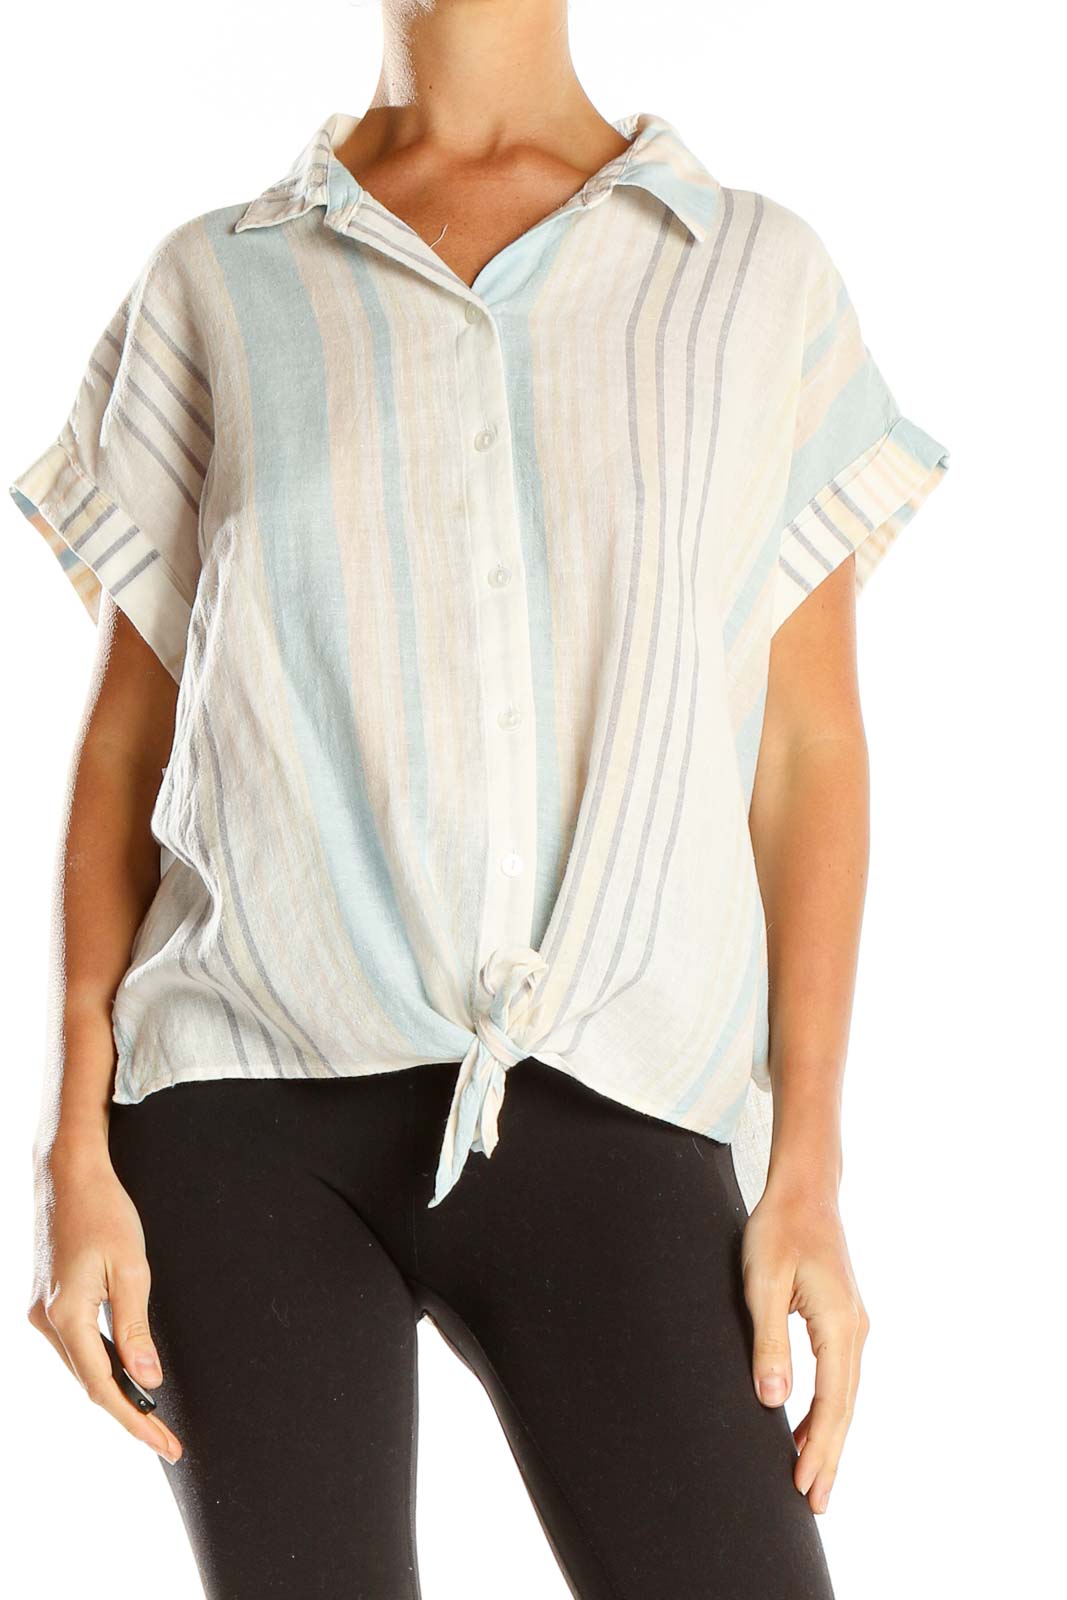 Blue Pastel Striped Casual Top Front